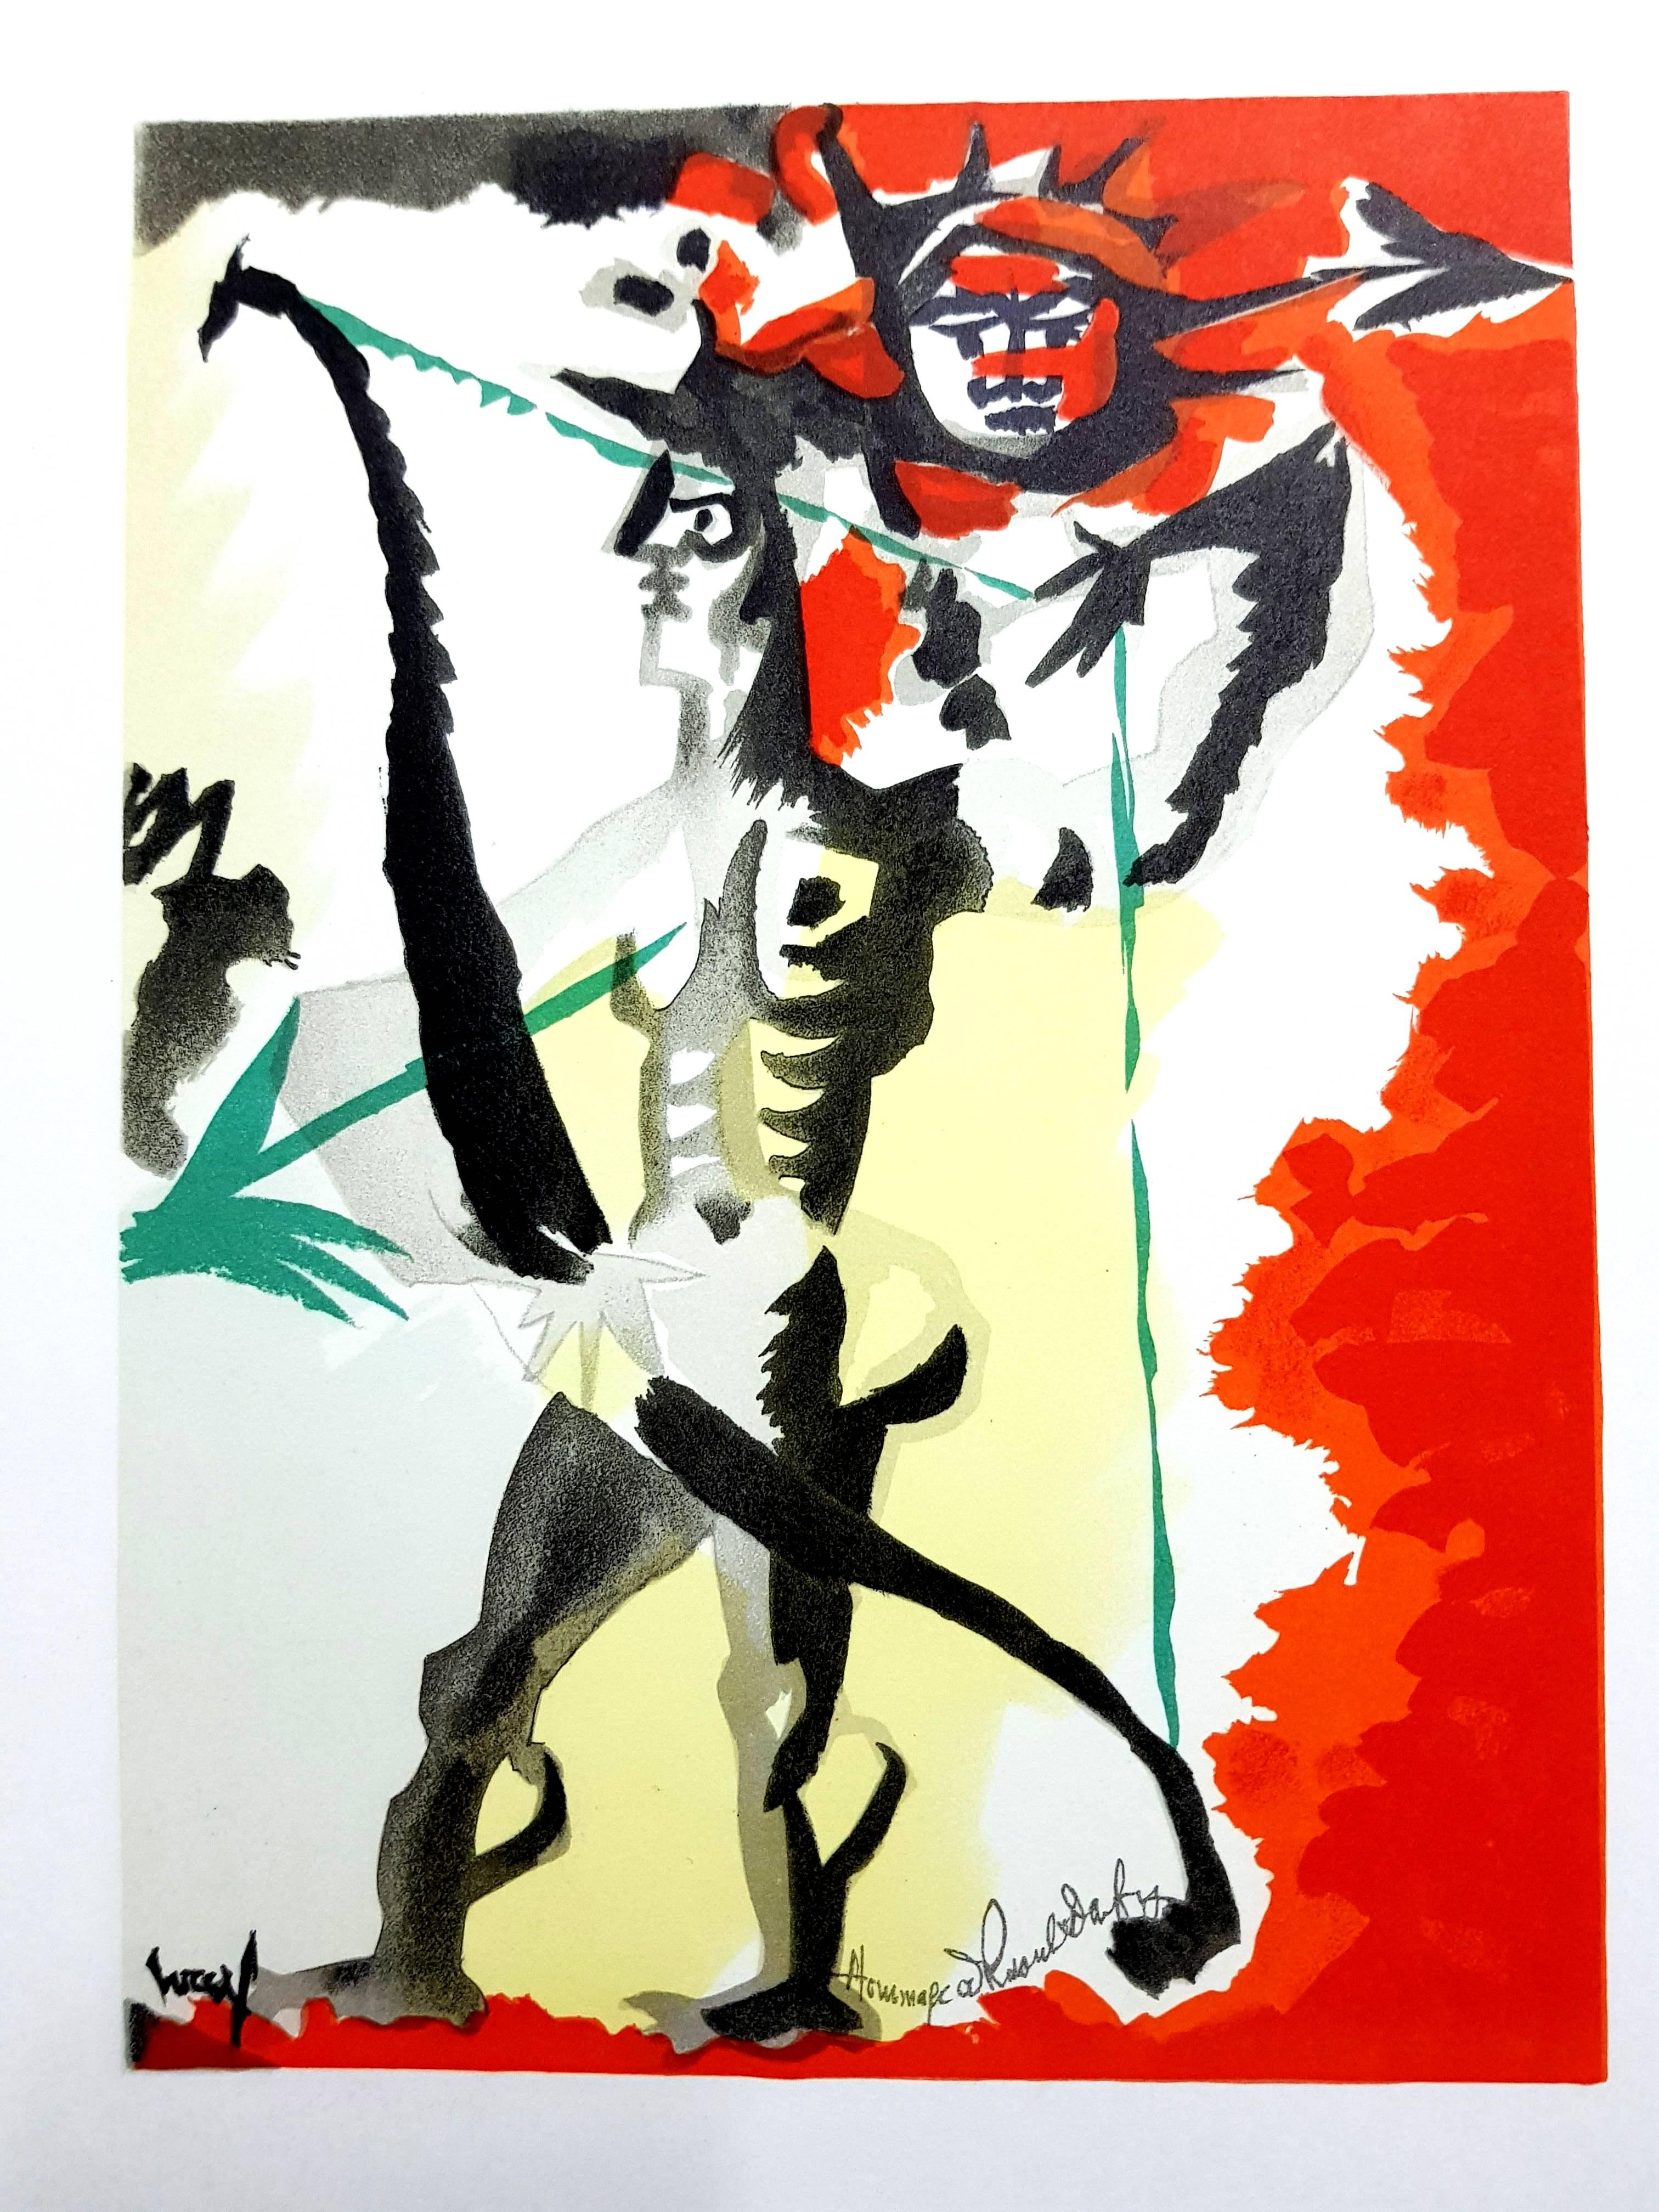 Jean Lurçat (after) - Homage to Dufy - Lithograph